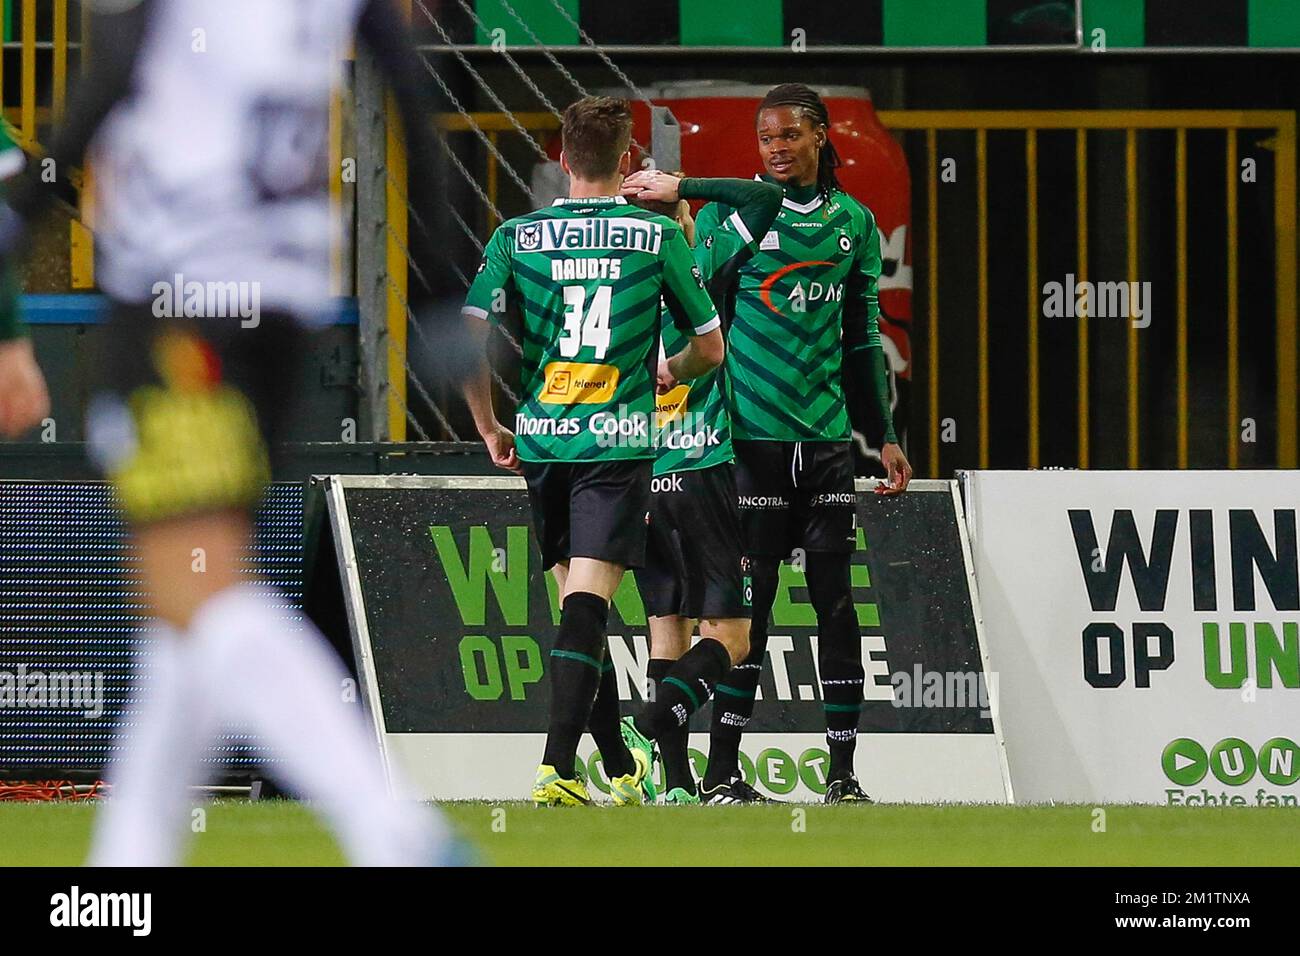 20140125 - BRUGGE, BELGIUM: Cercle's Michael Uchebo celebrates after scoring during the Jupiler Pro League match between Cercle Brugge and Charleroi, in Brugge, Saturday 25 January 2014, on day 23 of the Belgian soccer championship. BELGA PHOTO BRUNO FAHY Stock Photo